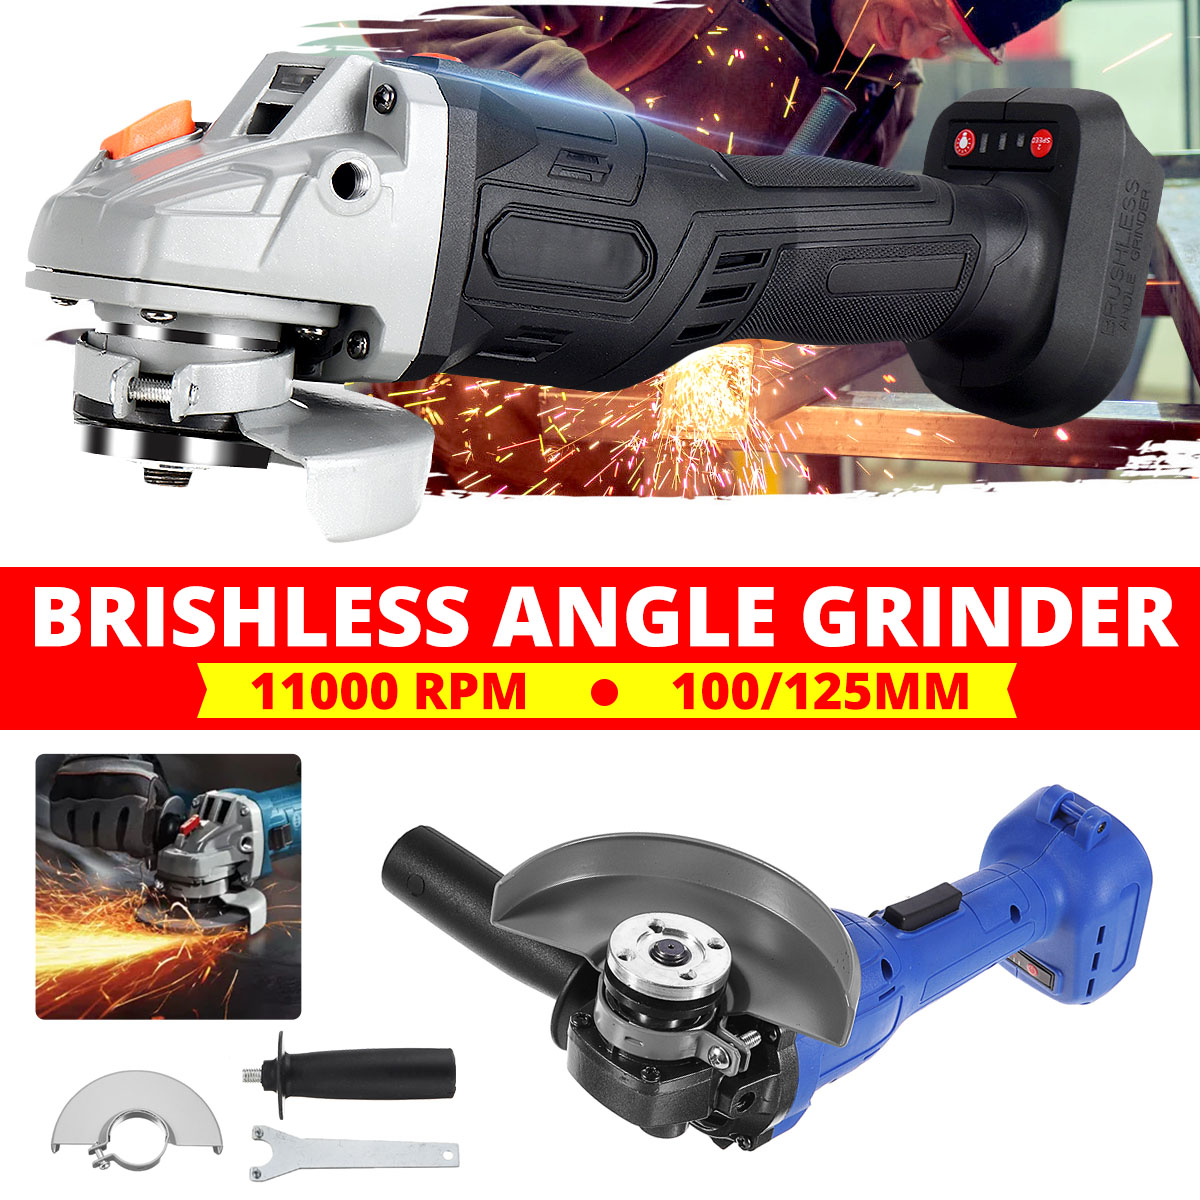 100125MM-Display-800W-Electric-Angle-Grinder-Rech-argeable-Polishing-Cutting-Machine-Hand-Grinder-To-1683204-1